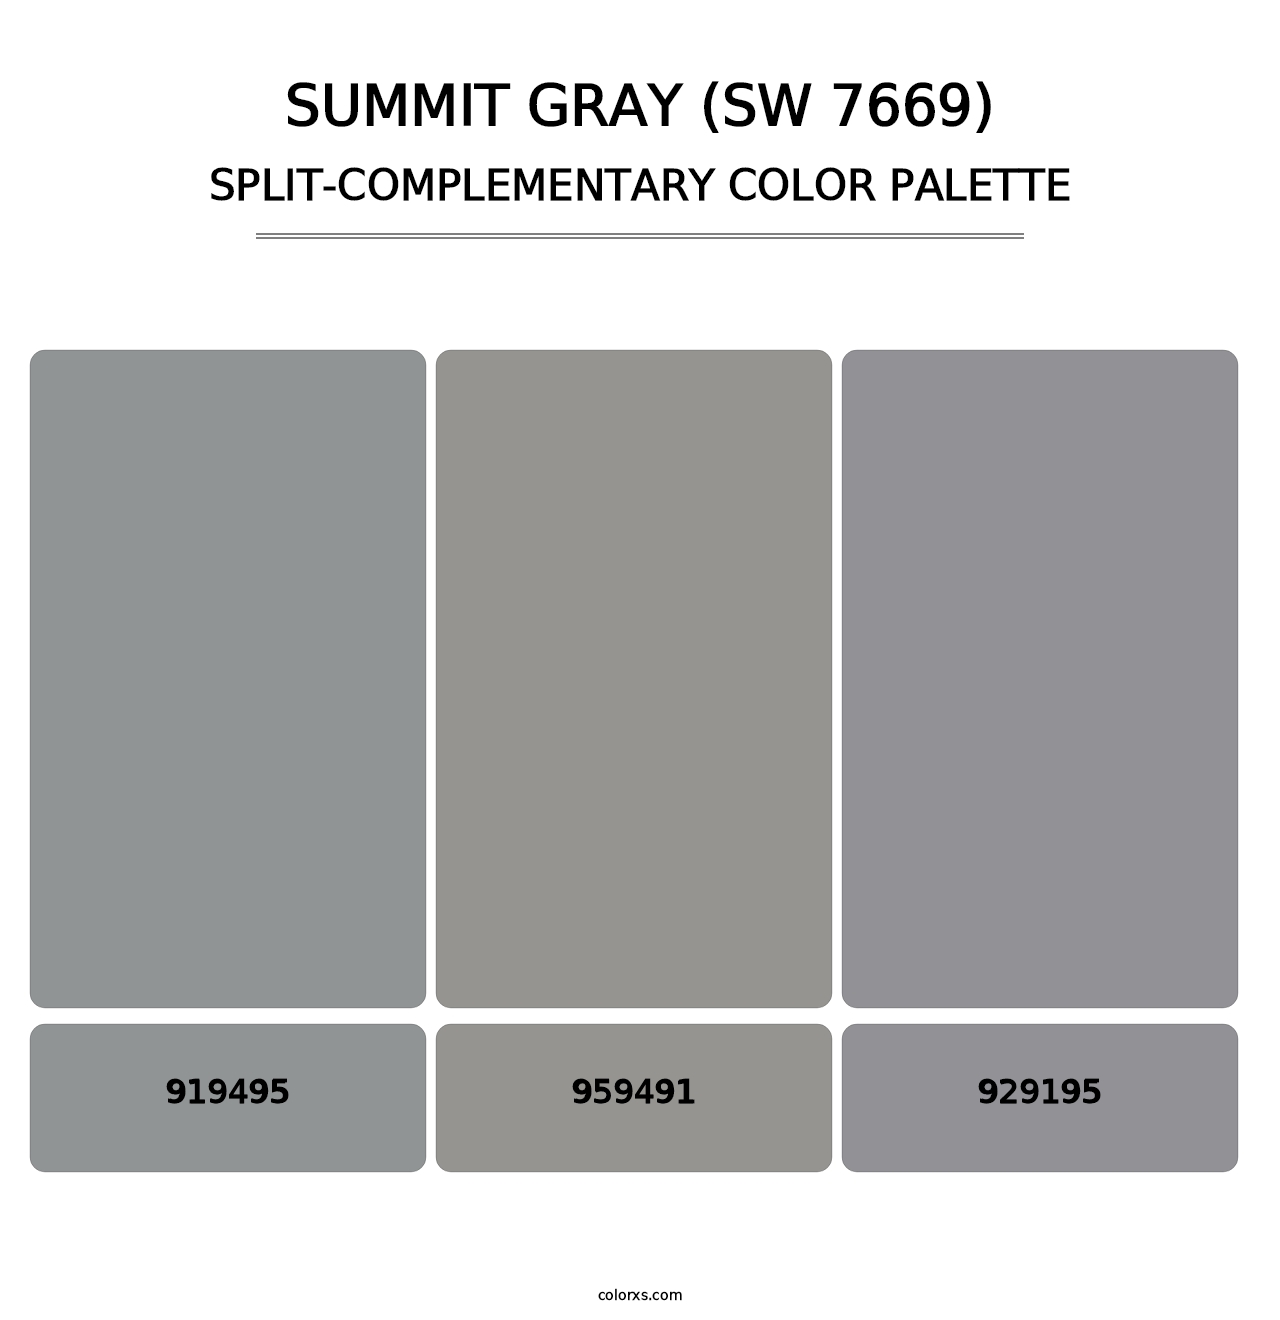 Summit Gray (SW 7669) - Split-Complementary Color Palette